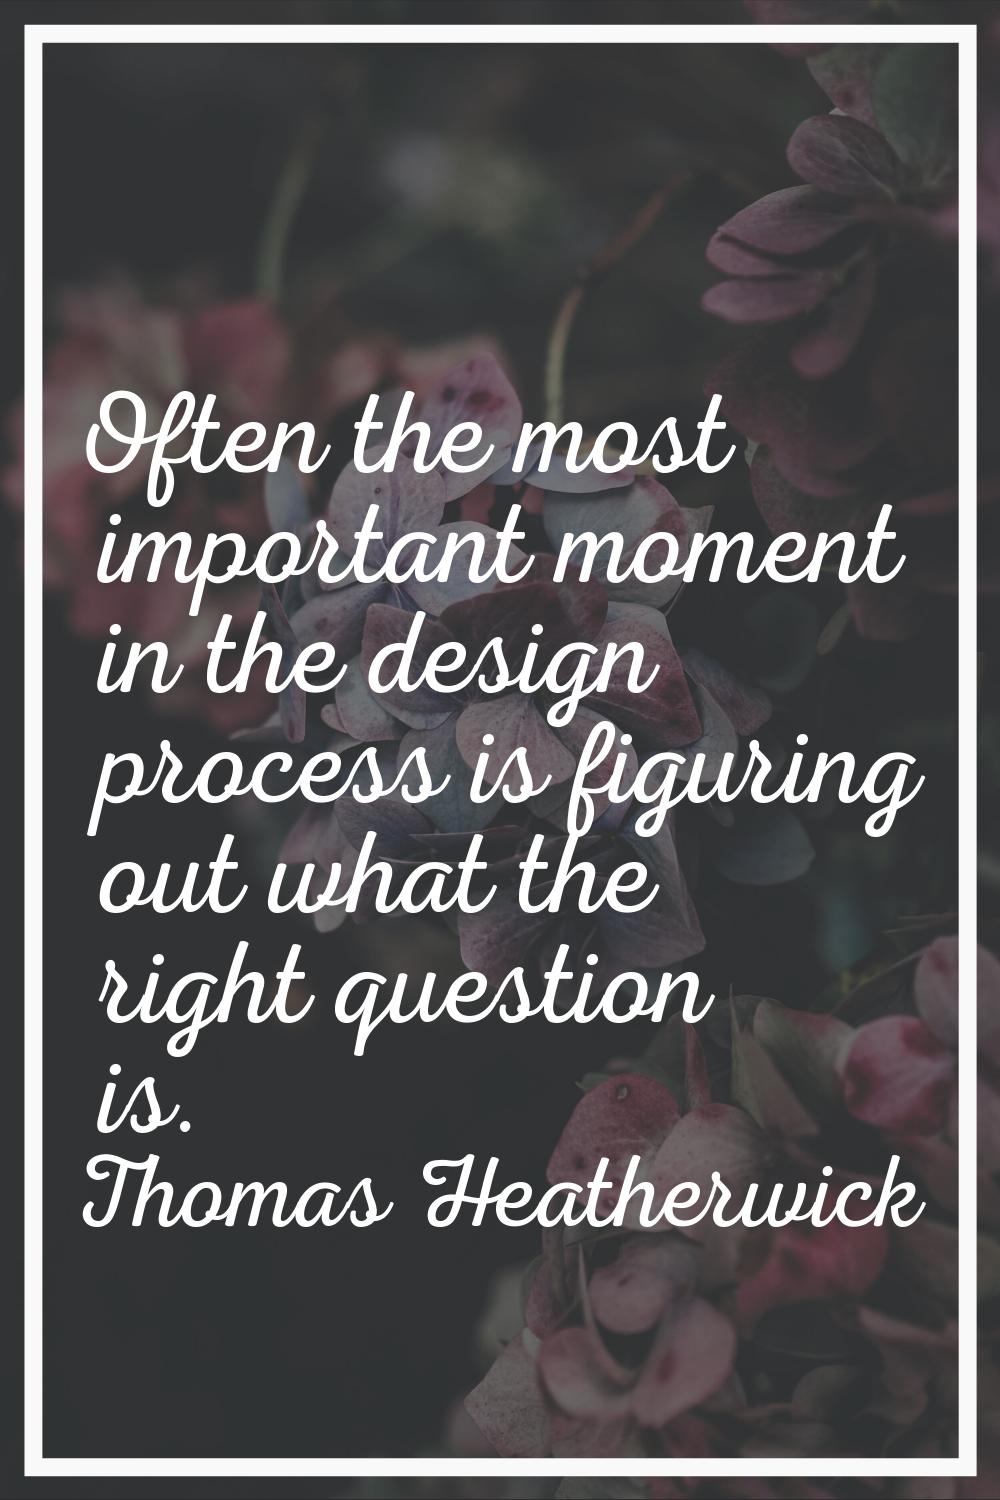 Often the most important moment in the design process is figuring out what the right question is.